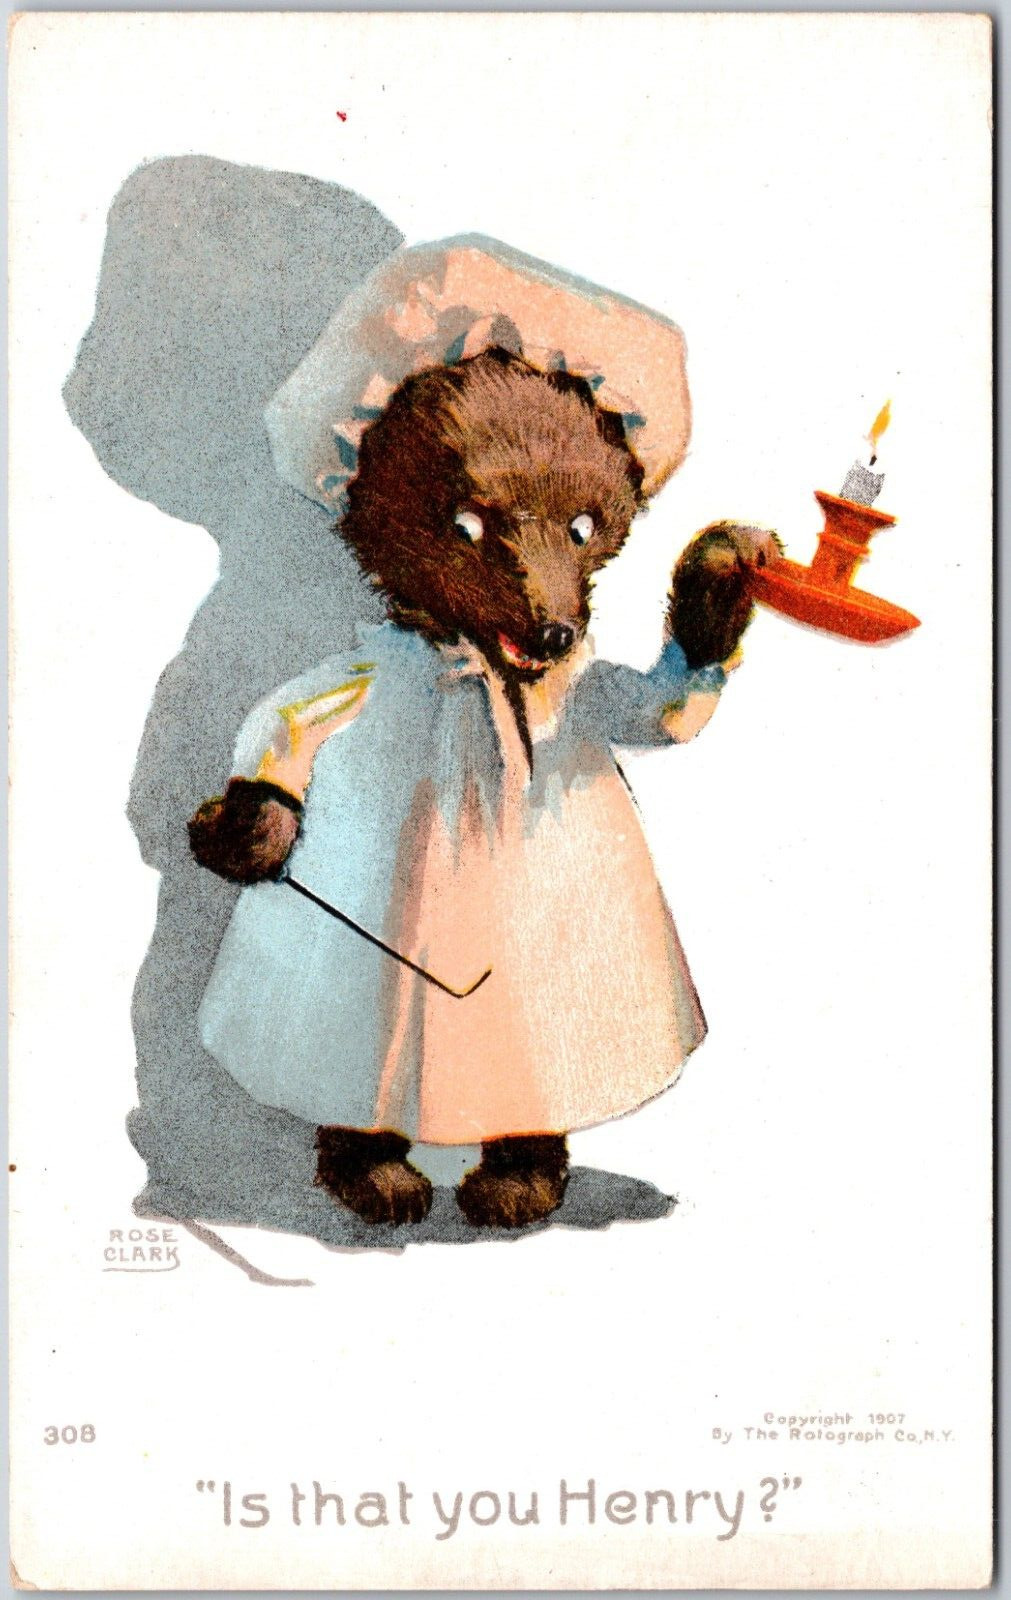 Is That You Henry Signed Rose Clark Bears Series Vintage Postcard 1907